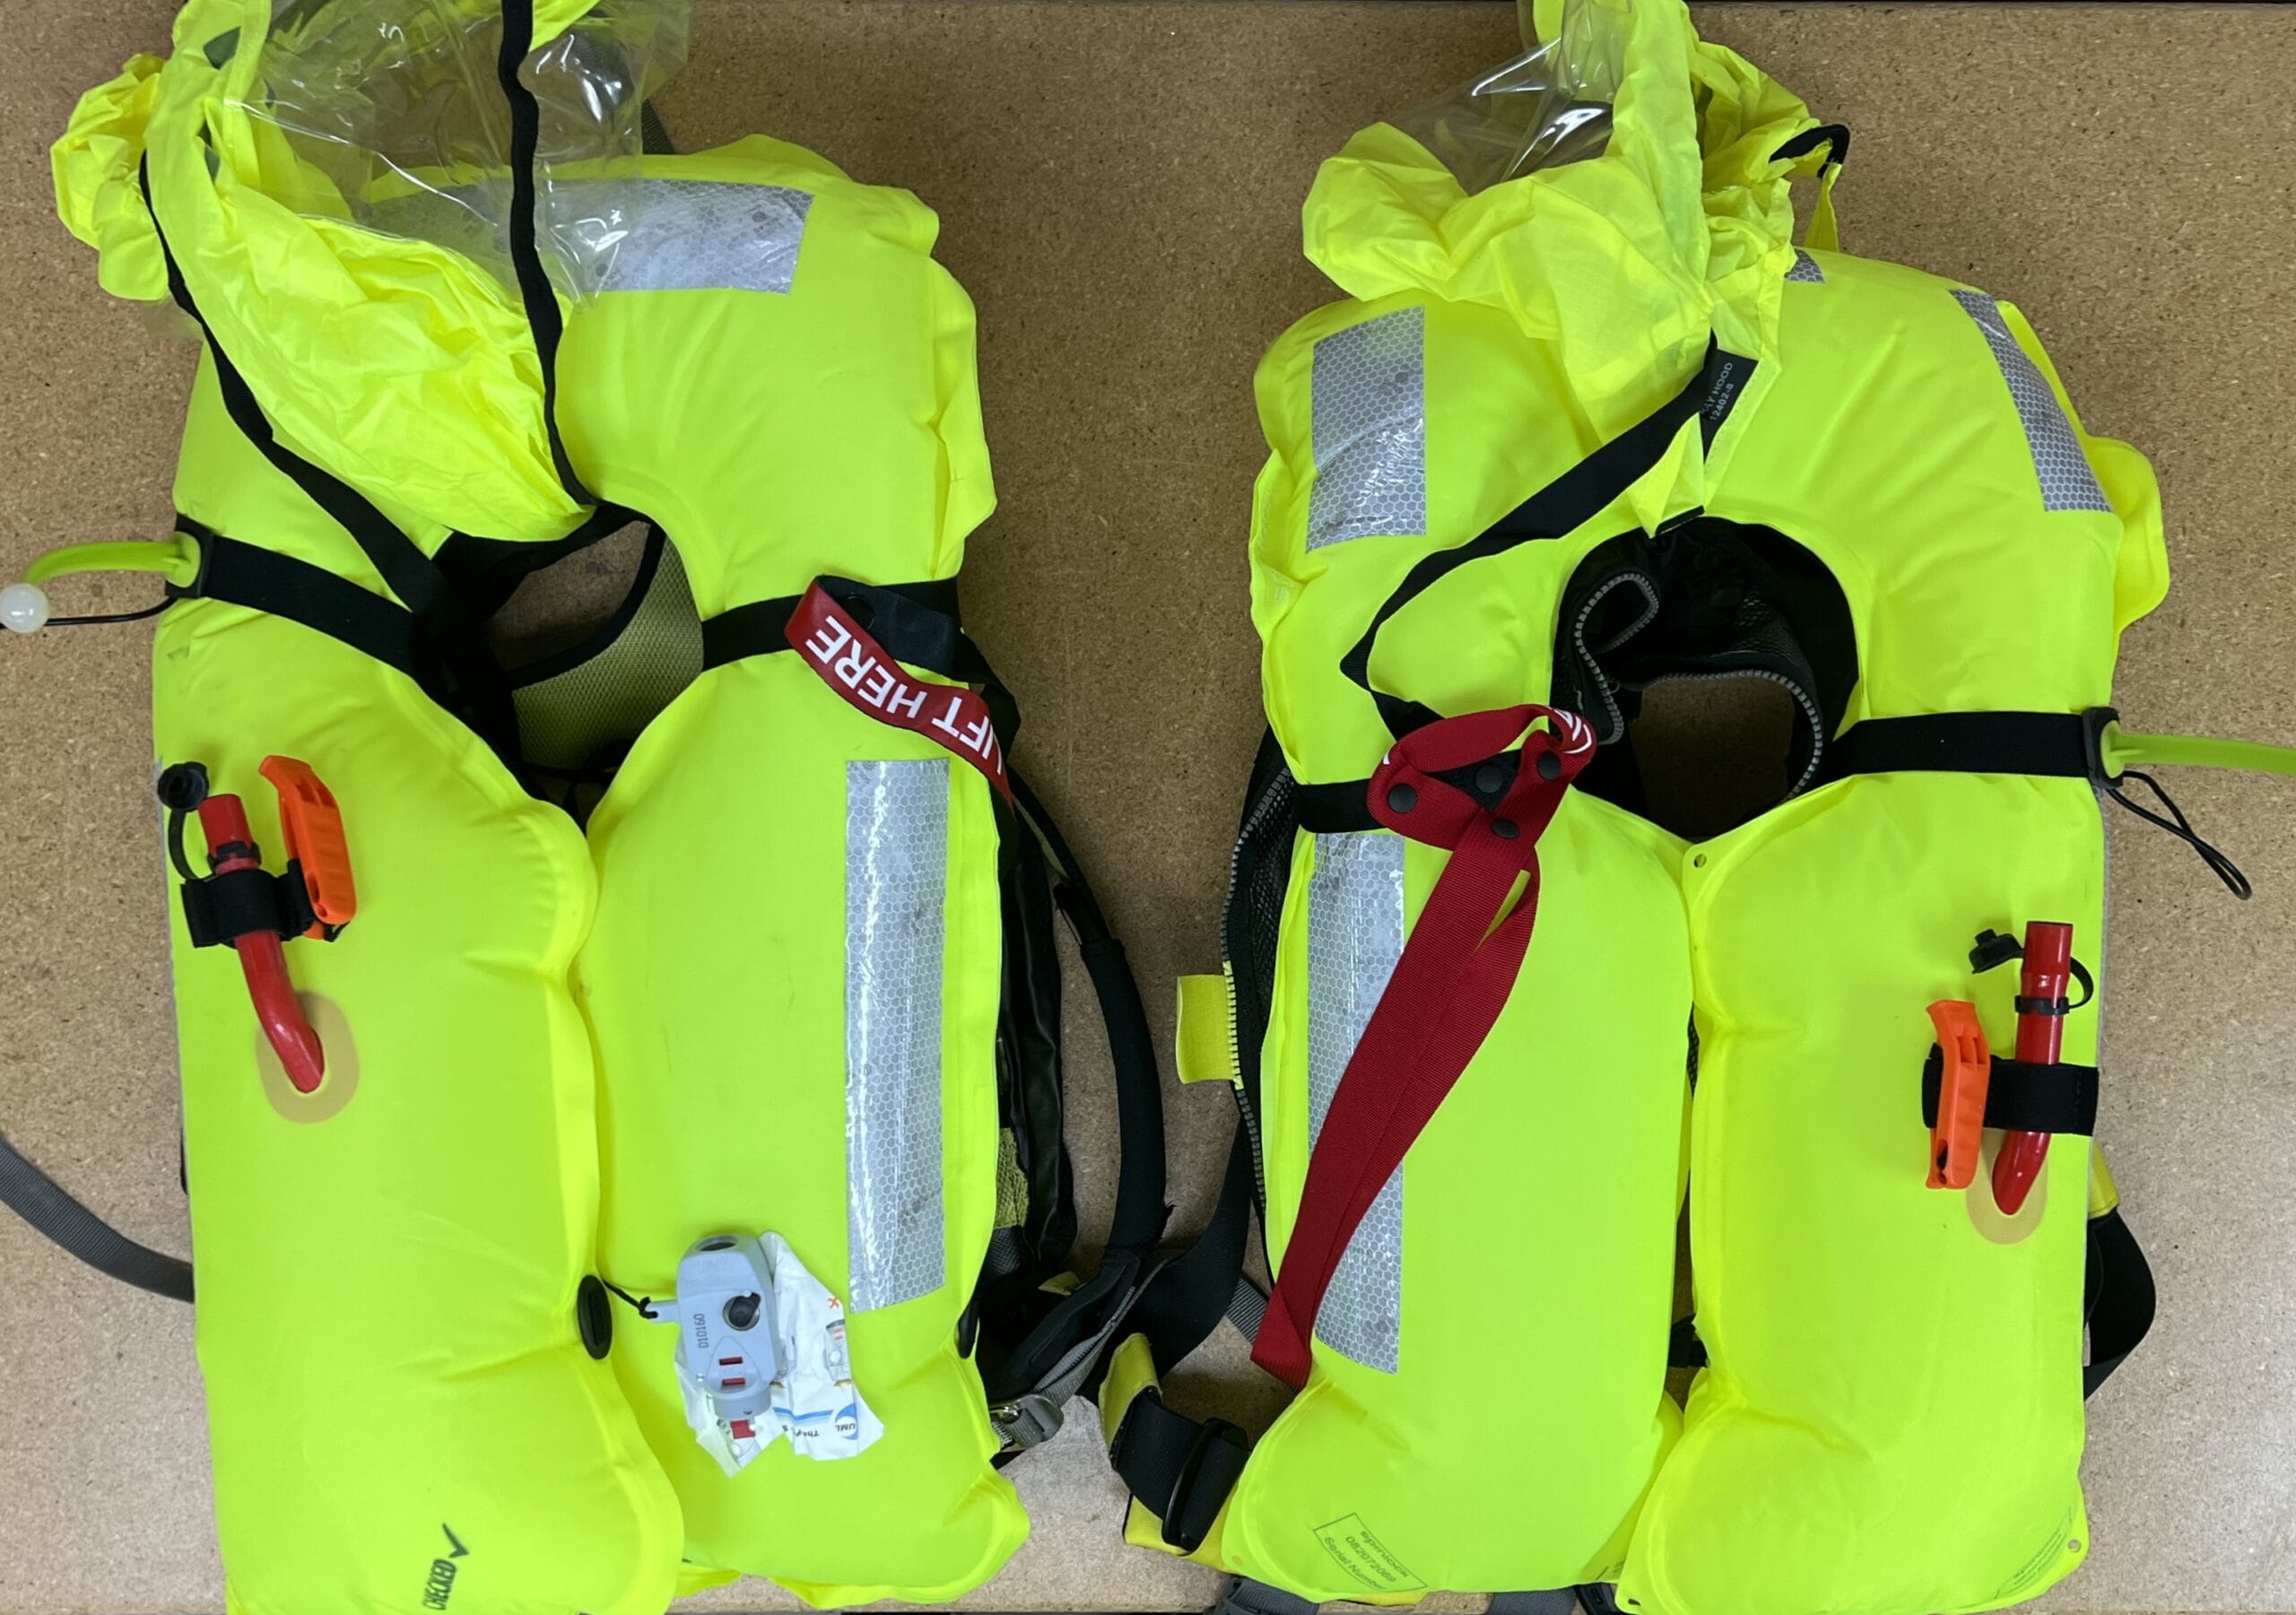 When Did Your Inflatable Lifejacket Last Feel The Love?